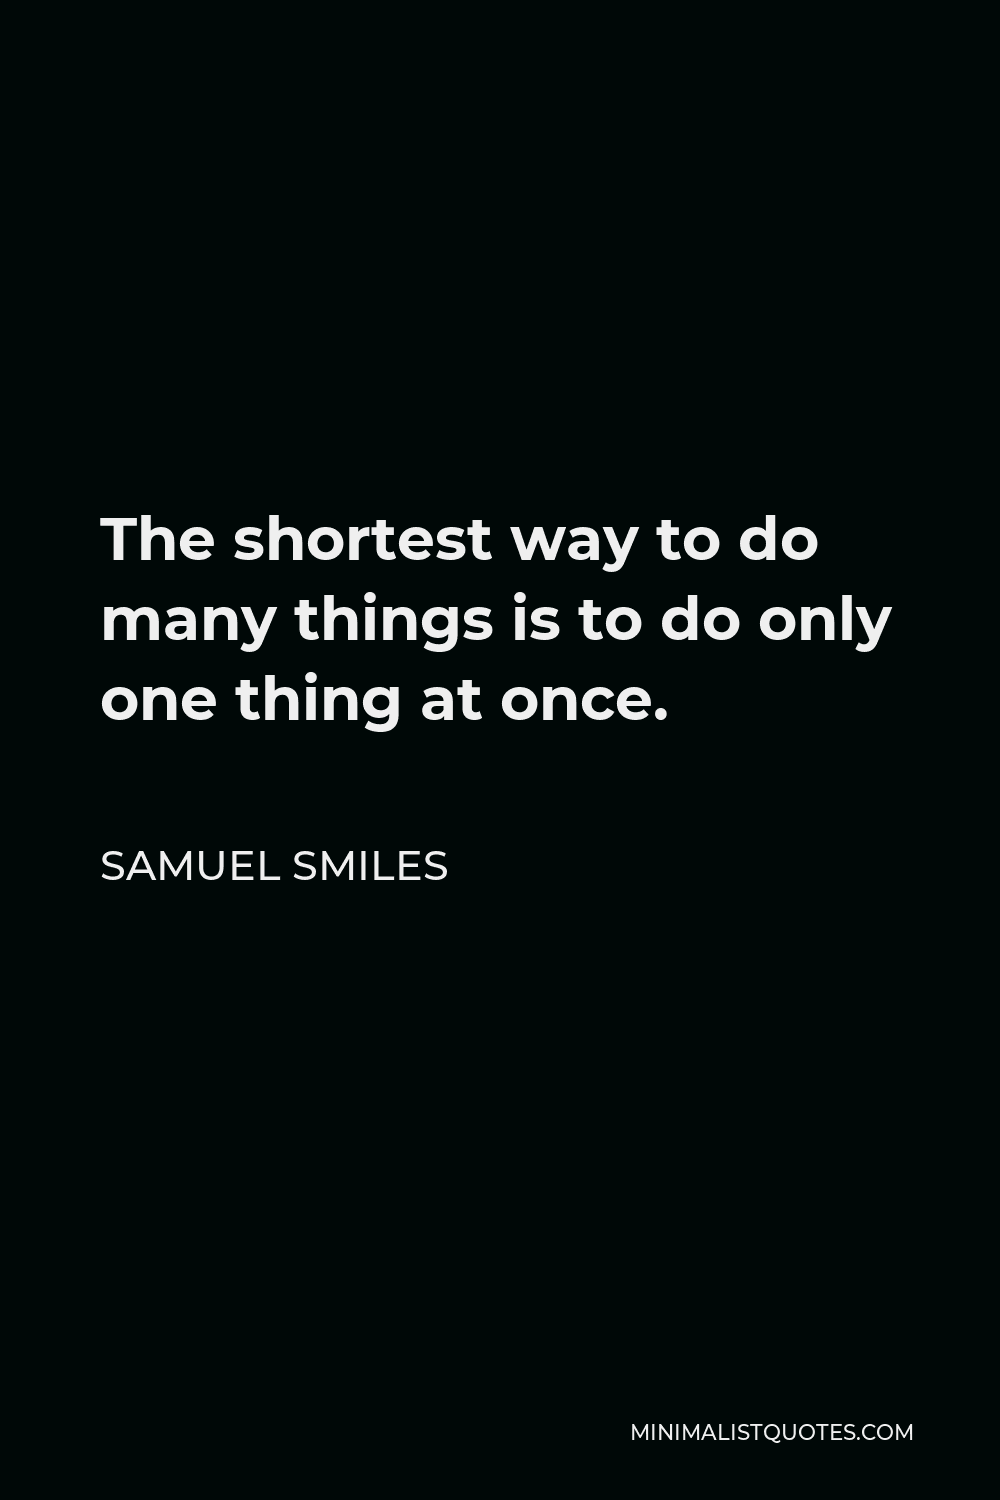 Samuel Smiles Quote - The shortest way to do many things is to do only one thing at once.